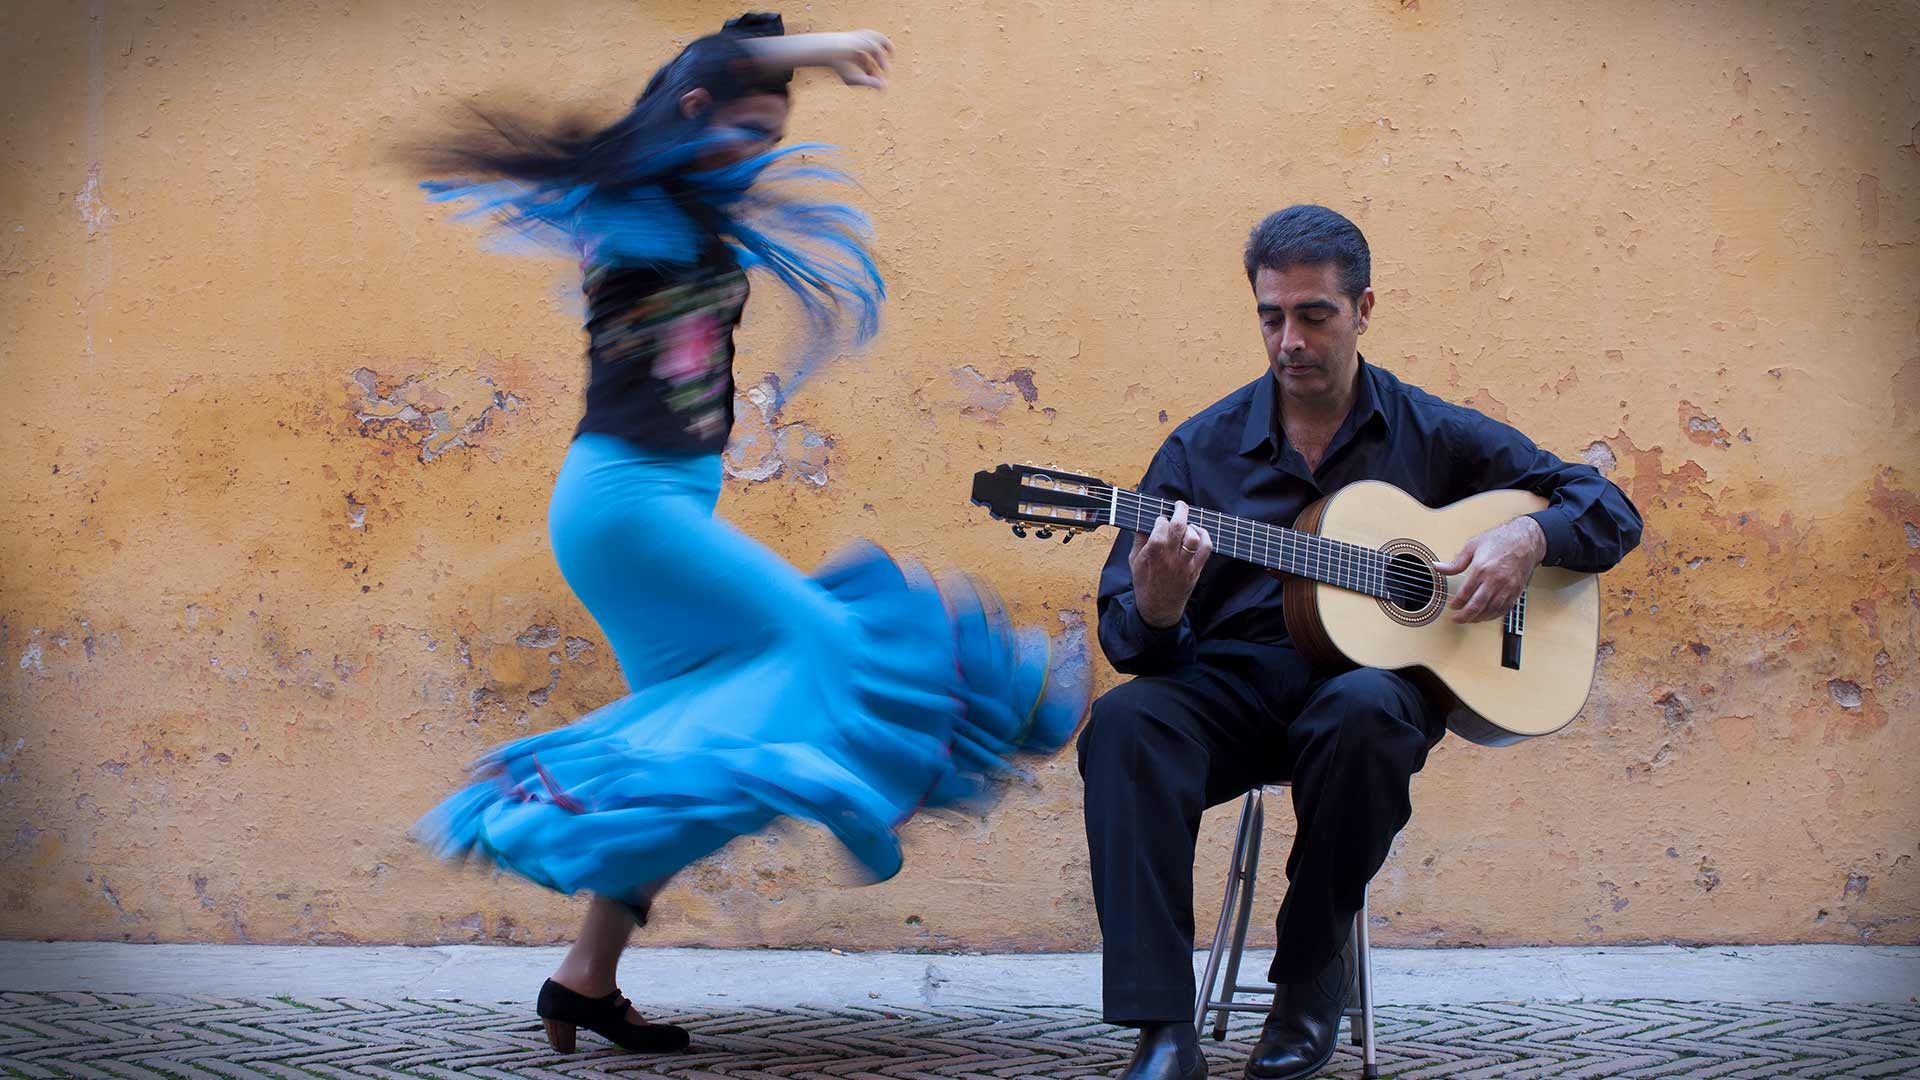 Woman dancing in the streets to a man playing guitar